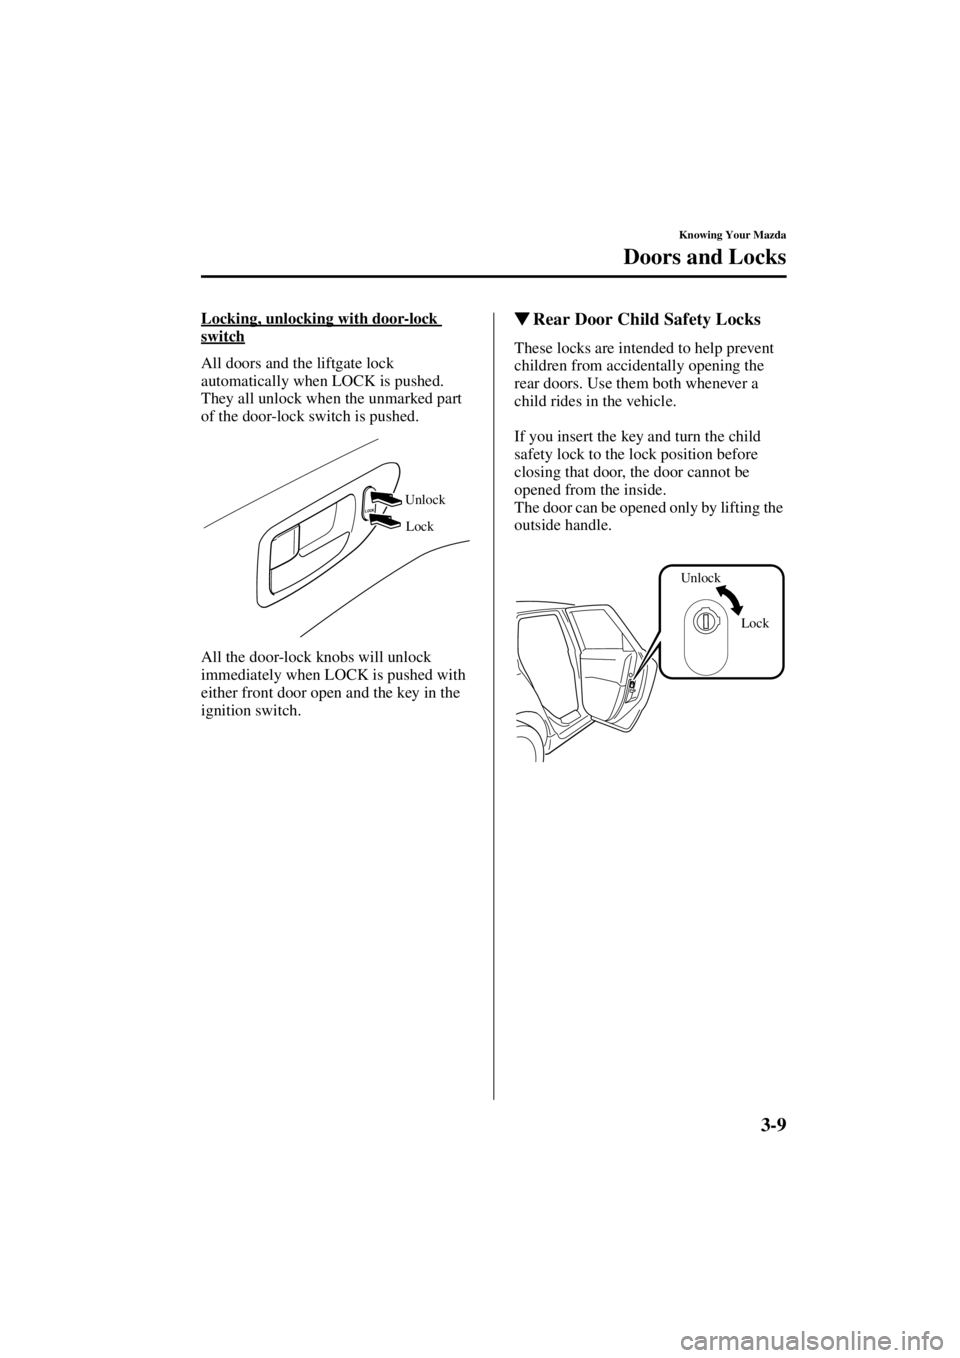 MAZDA MODEL 3 5-DOOR 2004 Manual PDF 3-9
Knowing Your Mazda
Doors and Locks
Form No. 8S18-EA-03I
Locking, unlocking with door-lock 
switch
All doors and the liftgate lock 
automatically when LOCK is pushed. 
They all unlock when the unma